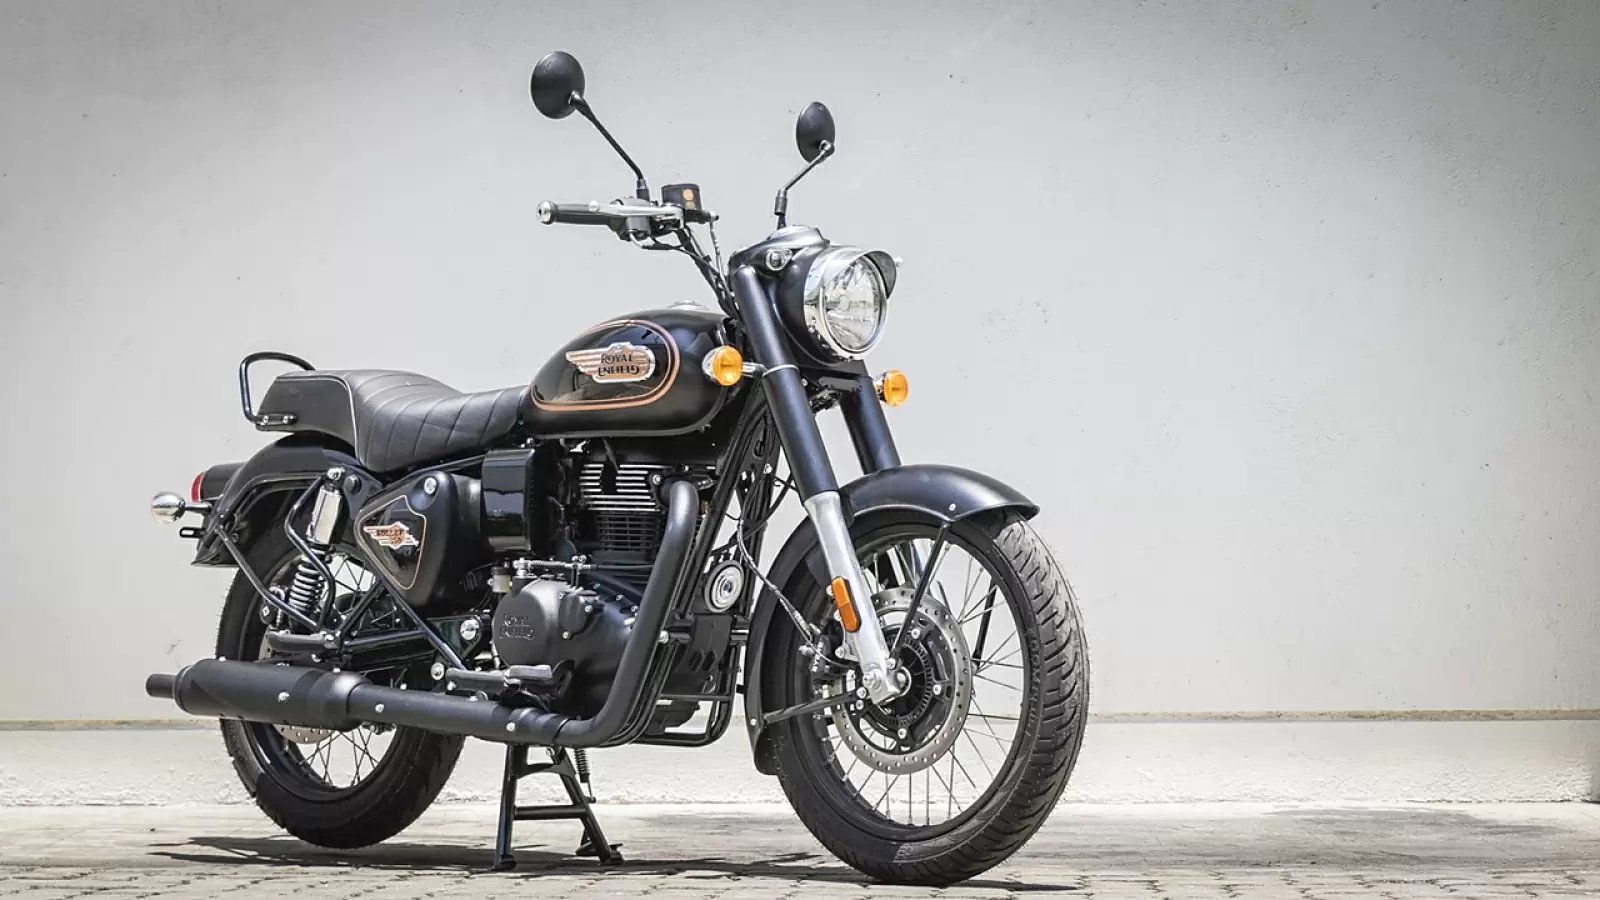 Made in India Royal Enfield Bullet 350 launched in Japan, know how much higher the price compared to India